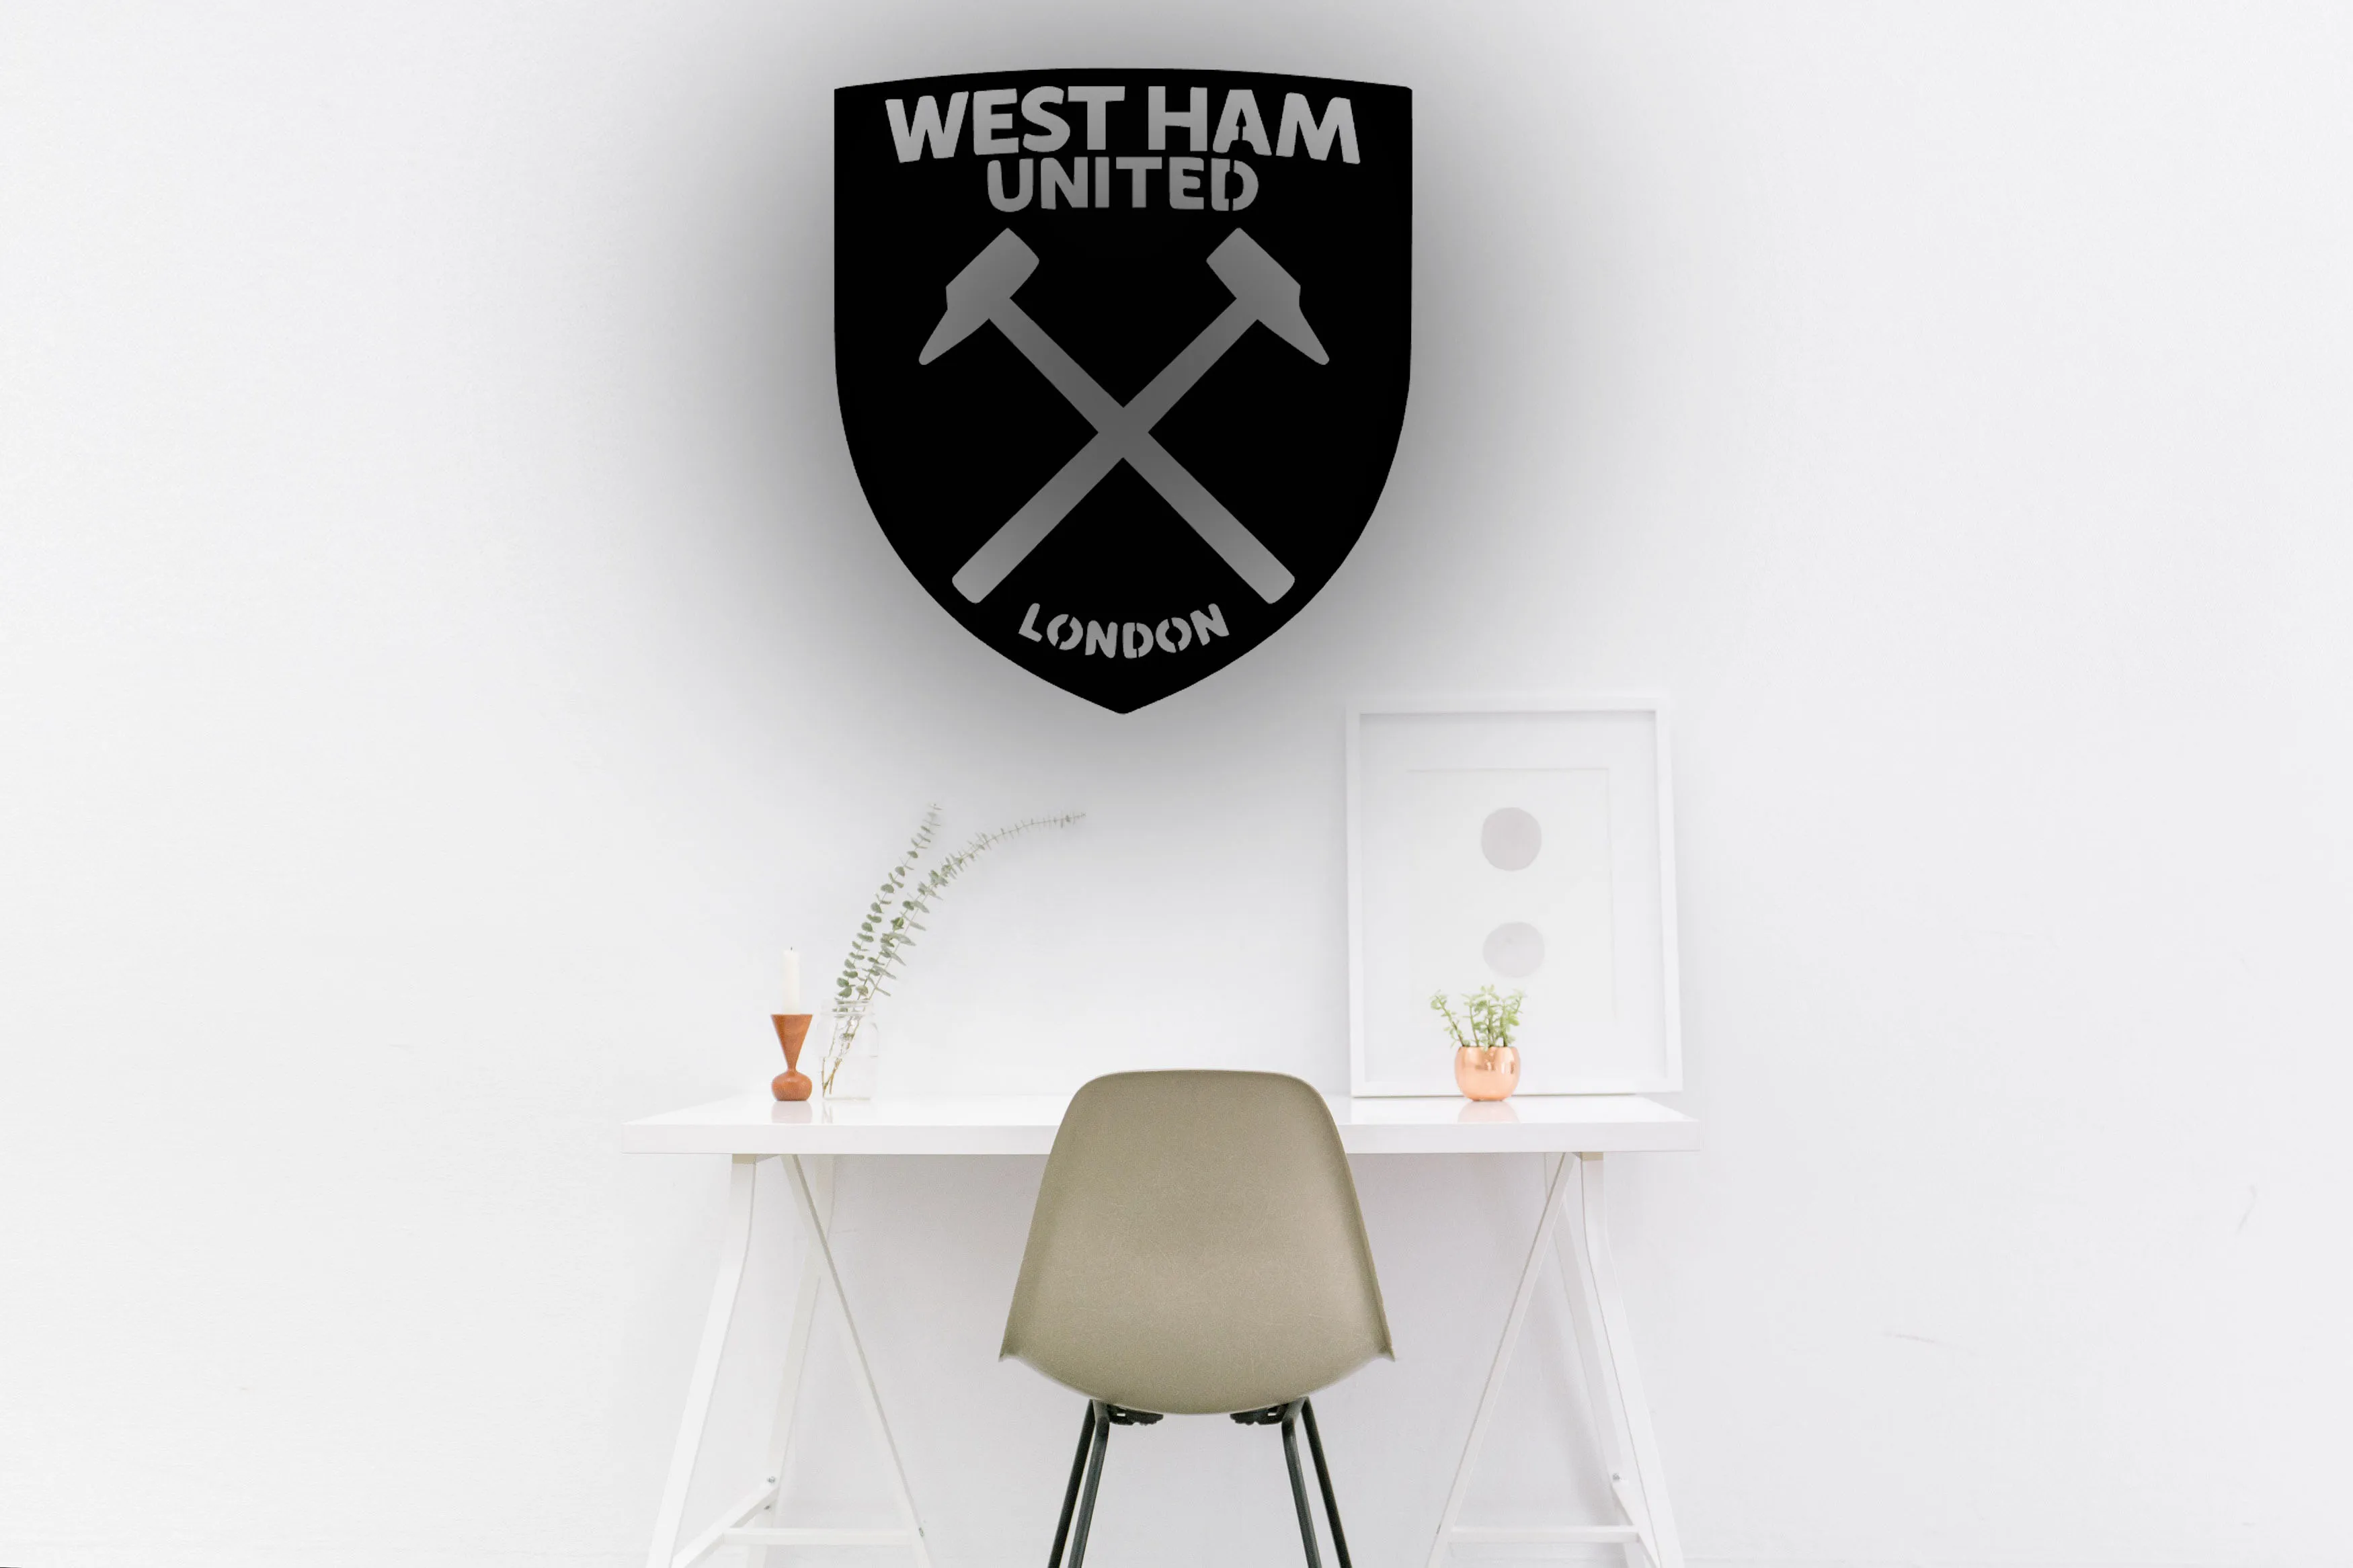 

West Ham United Logo Metal Wall Art Decor Picture Decoration Wall Decor Table Hanging Football Team Fans Present Gift